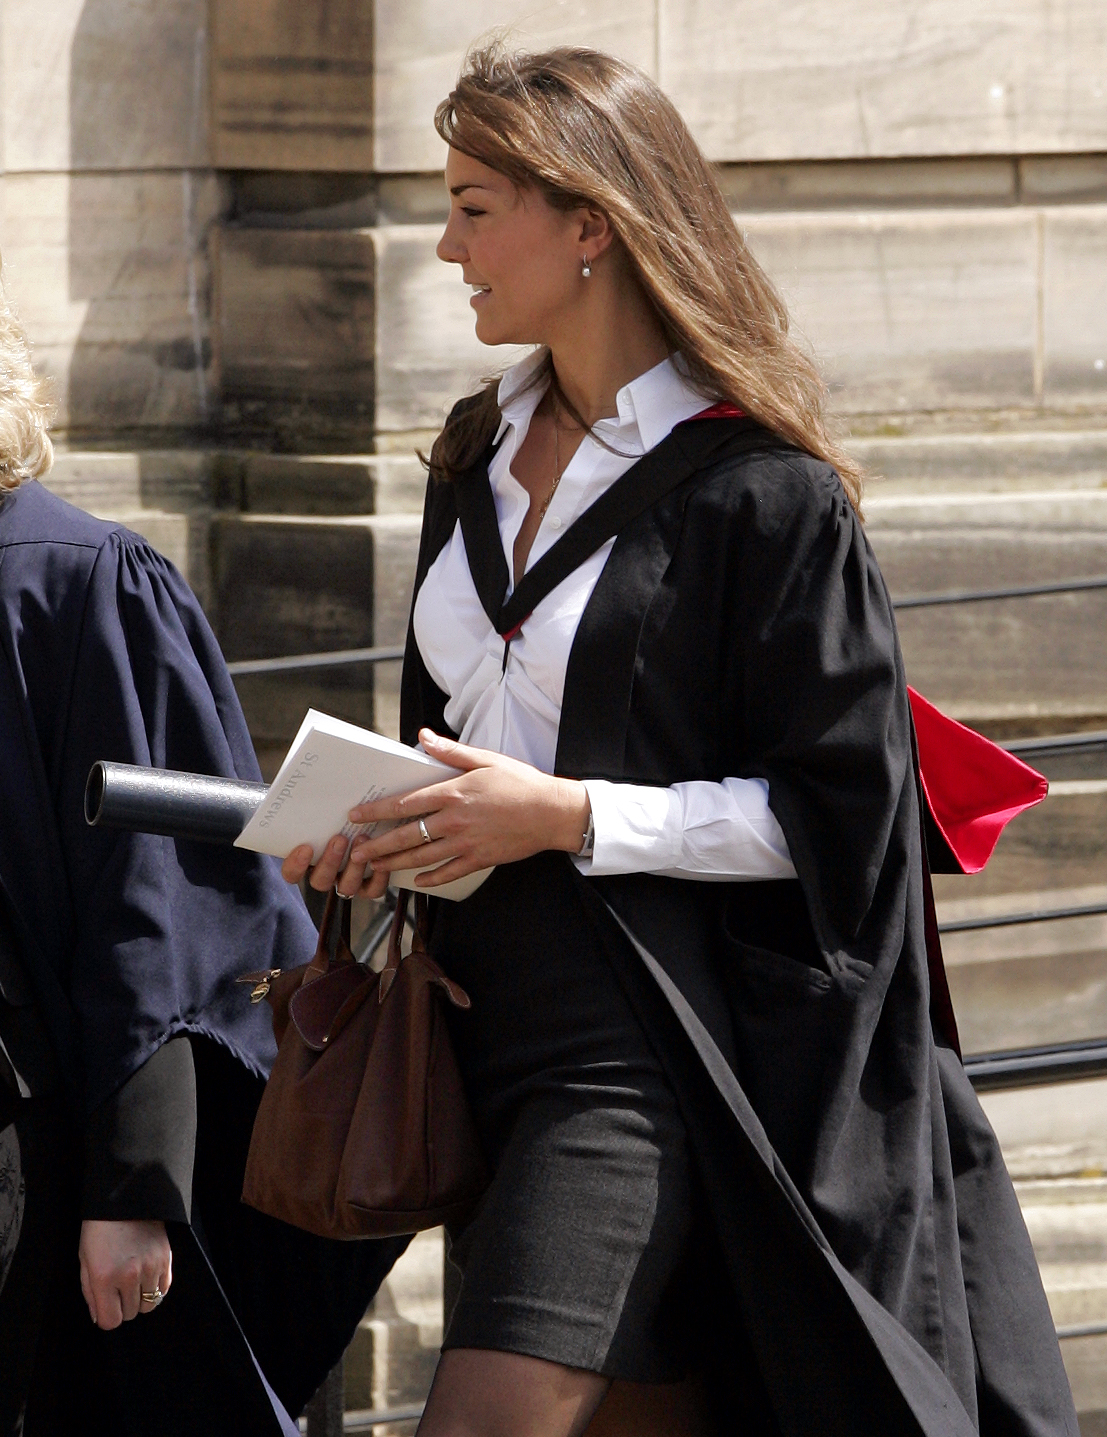 Kate Middleton attends her graduation ceremony at the University of St. Andrews on June 23, 2005 in St. Andrews, Scotland. | Source: Getty Images